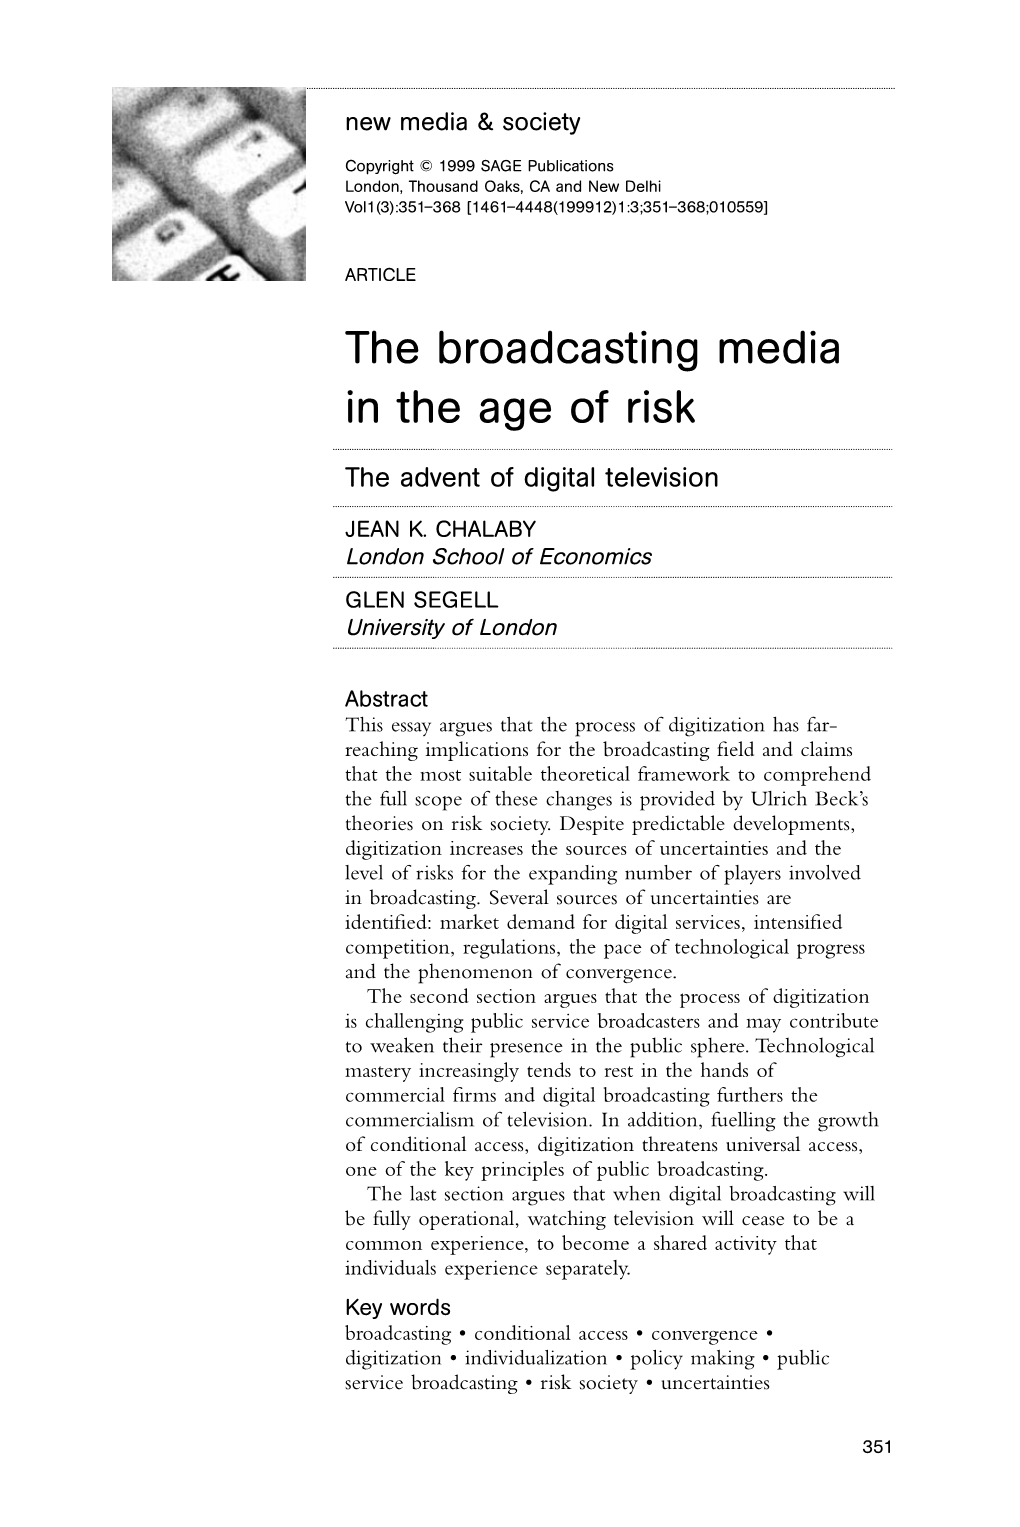 The Broadcasting Media in the Age of Risk